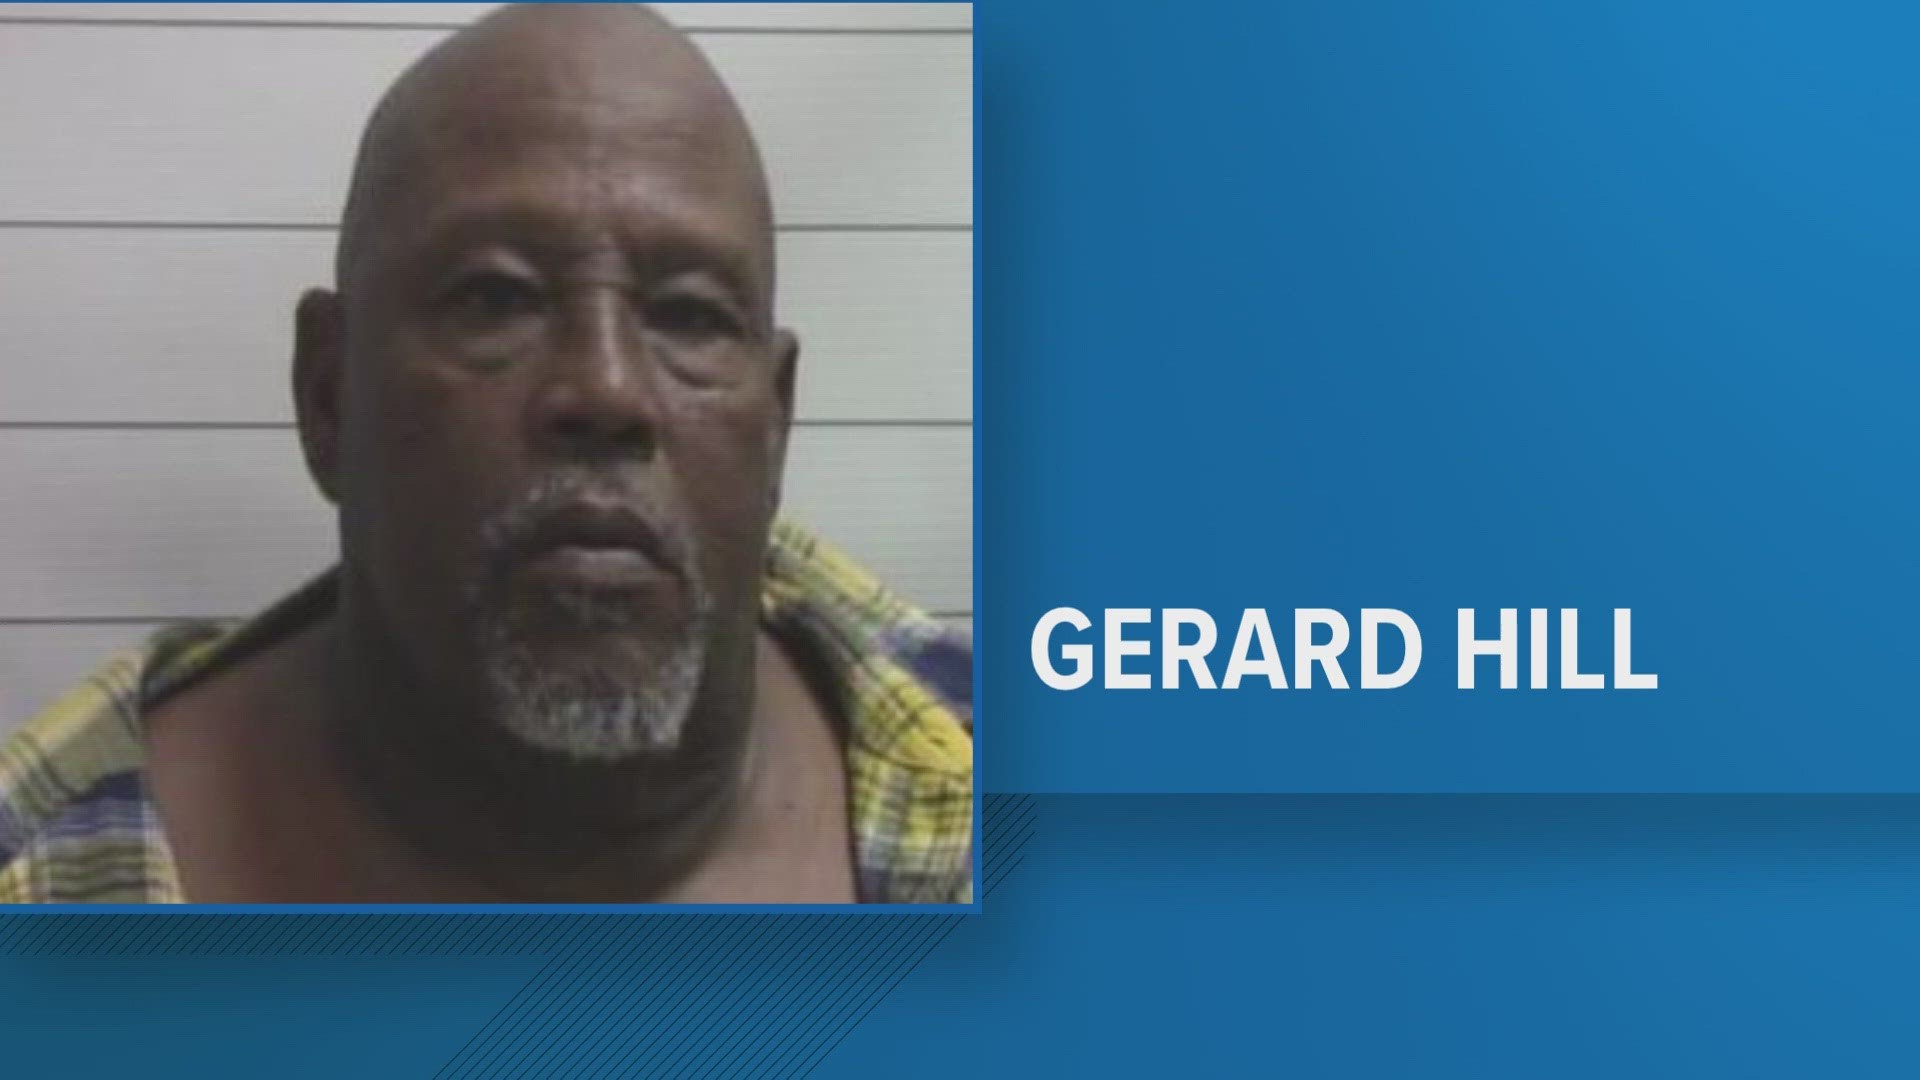 The NOPD has identified the man accused of shooting and killing a woman in the Holy Cross neighborhood Thursday night.